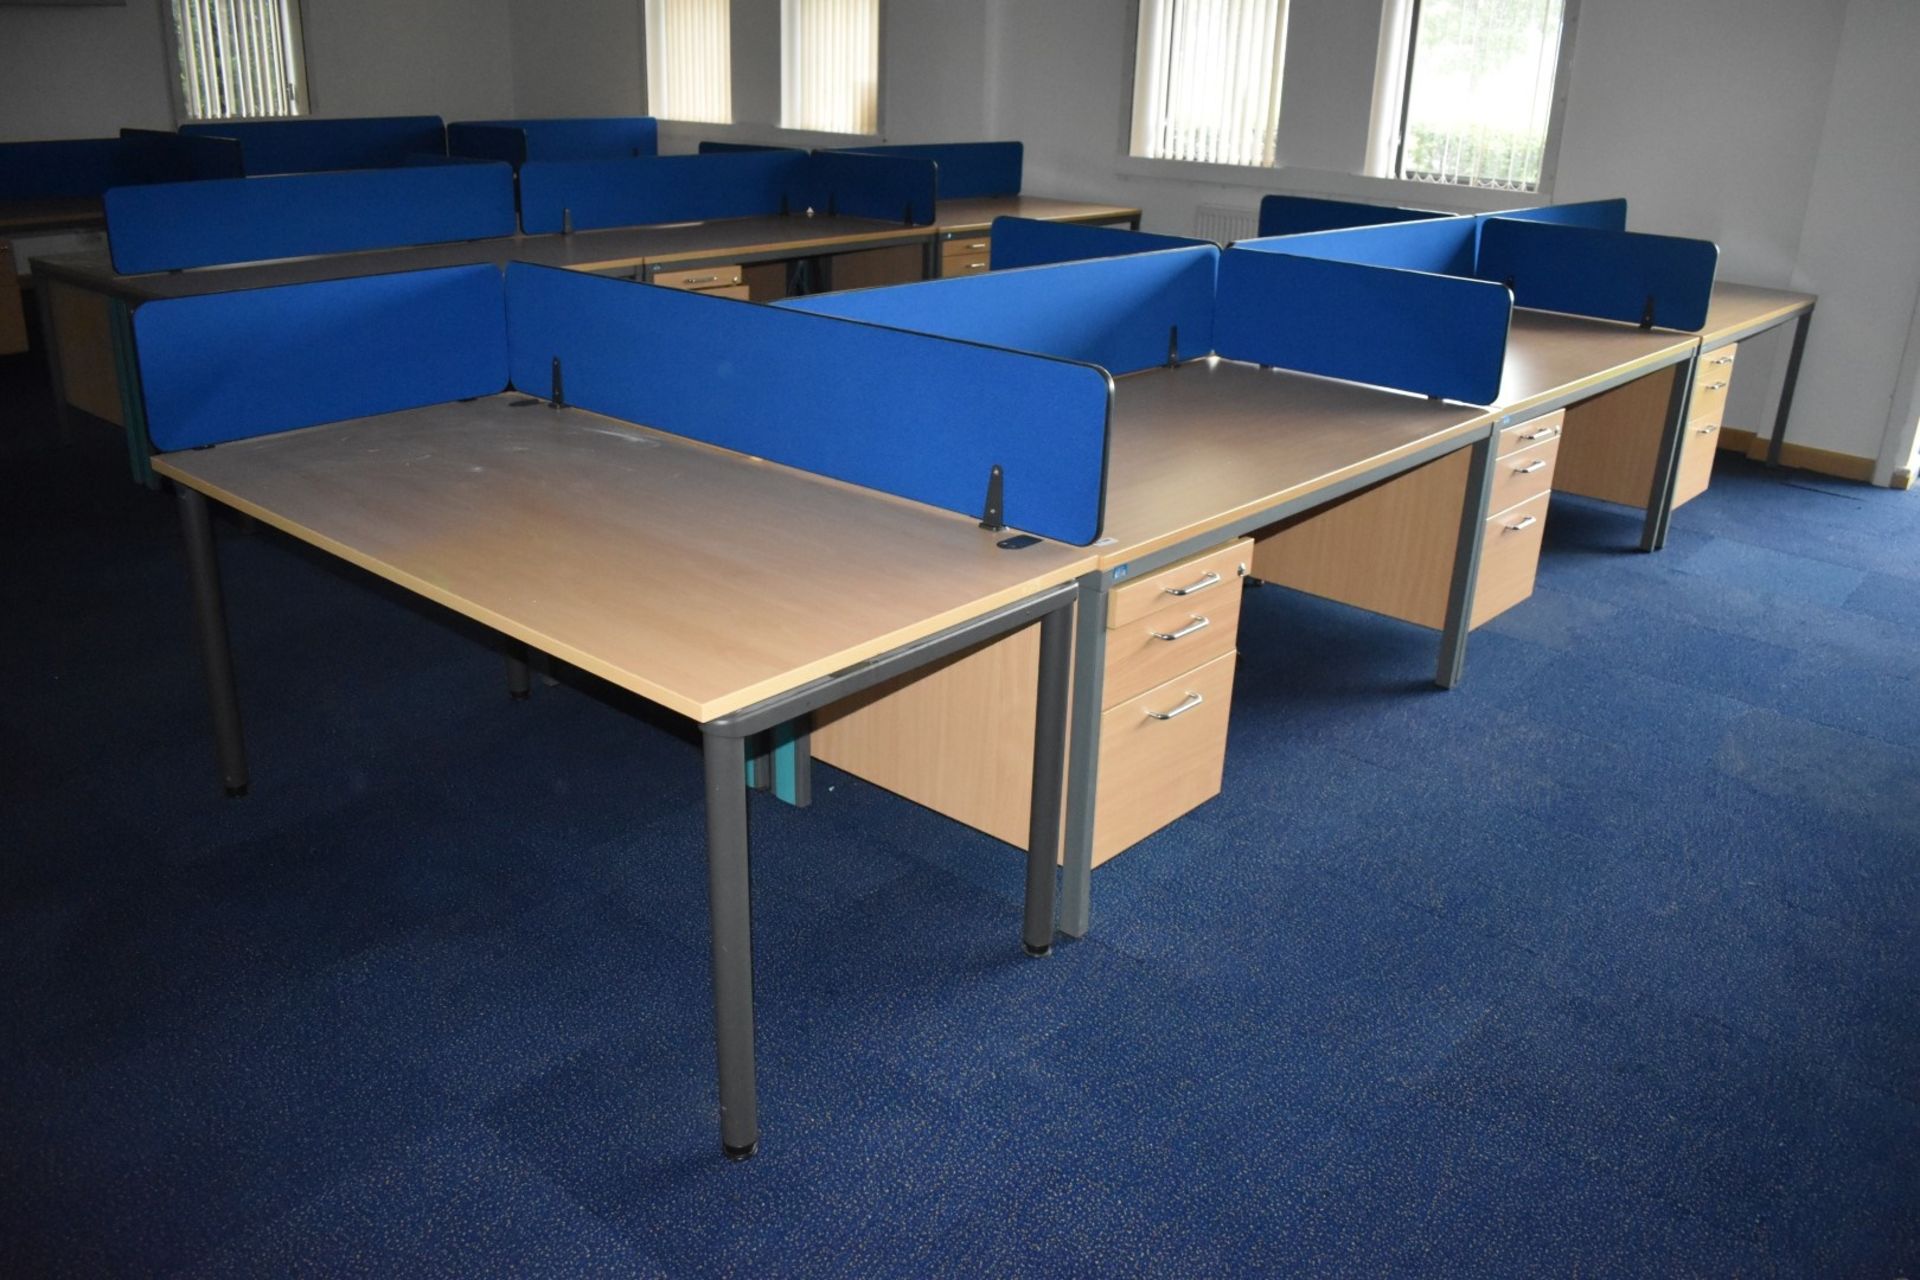 7 x Beech Office Desks With Integrated Drawer Pedestals and Privacy Partitions - Size of Each Desk - Image 10 of 10